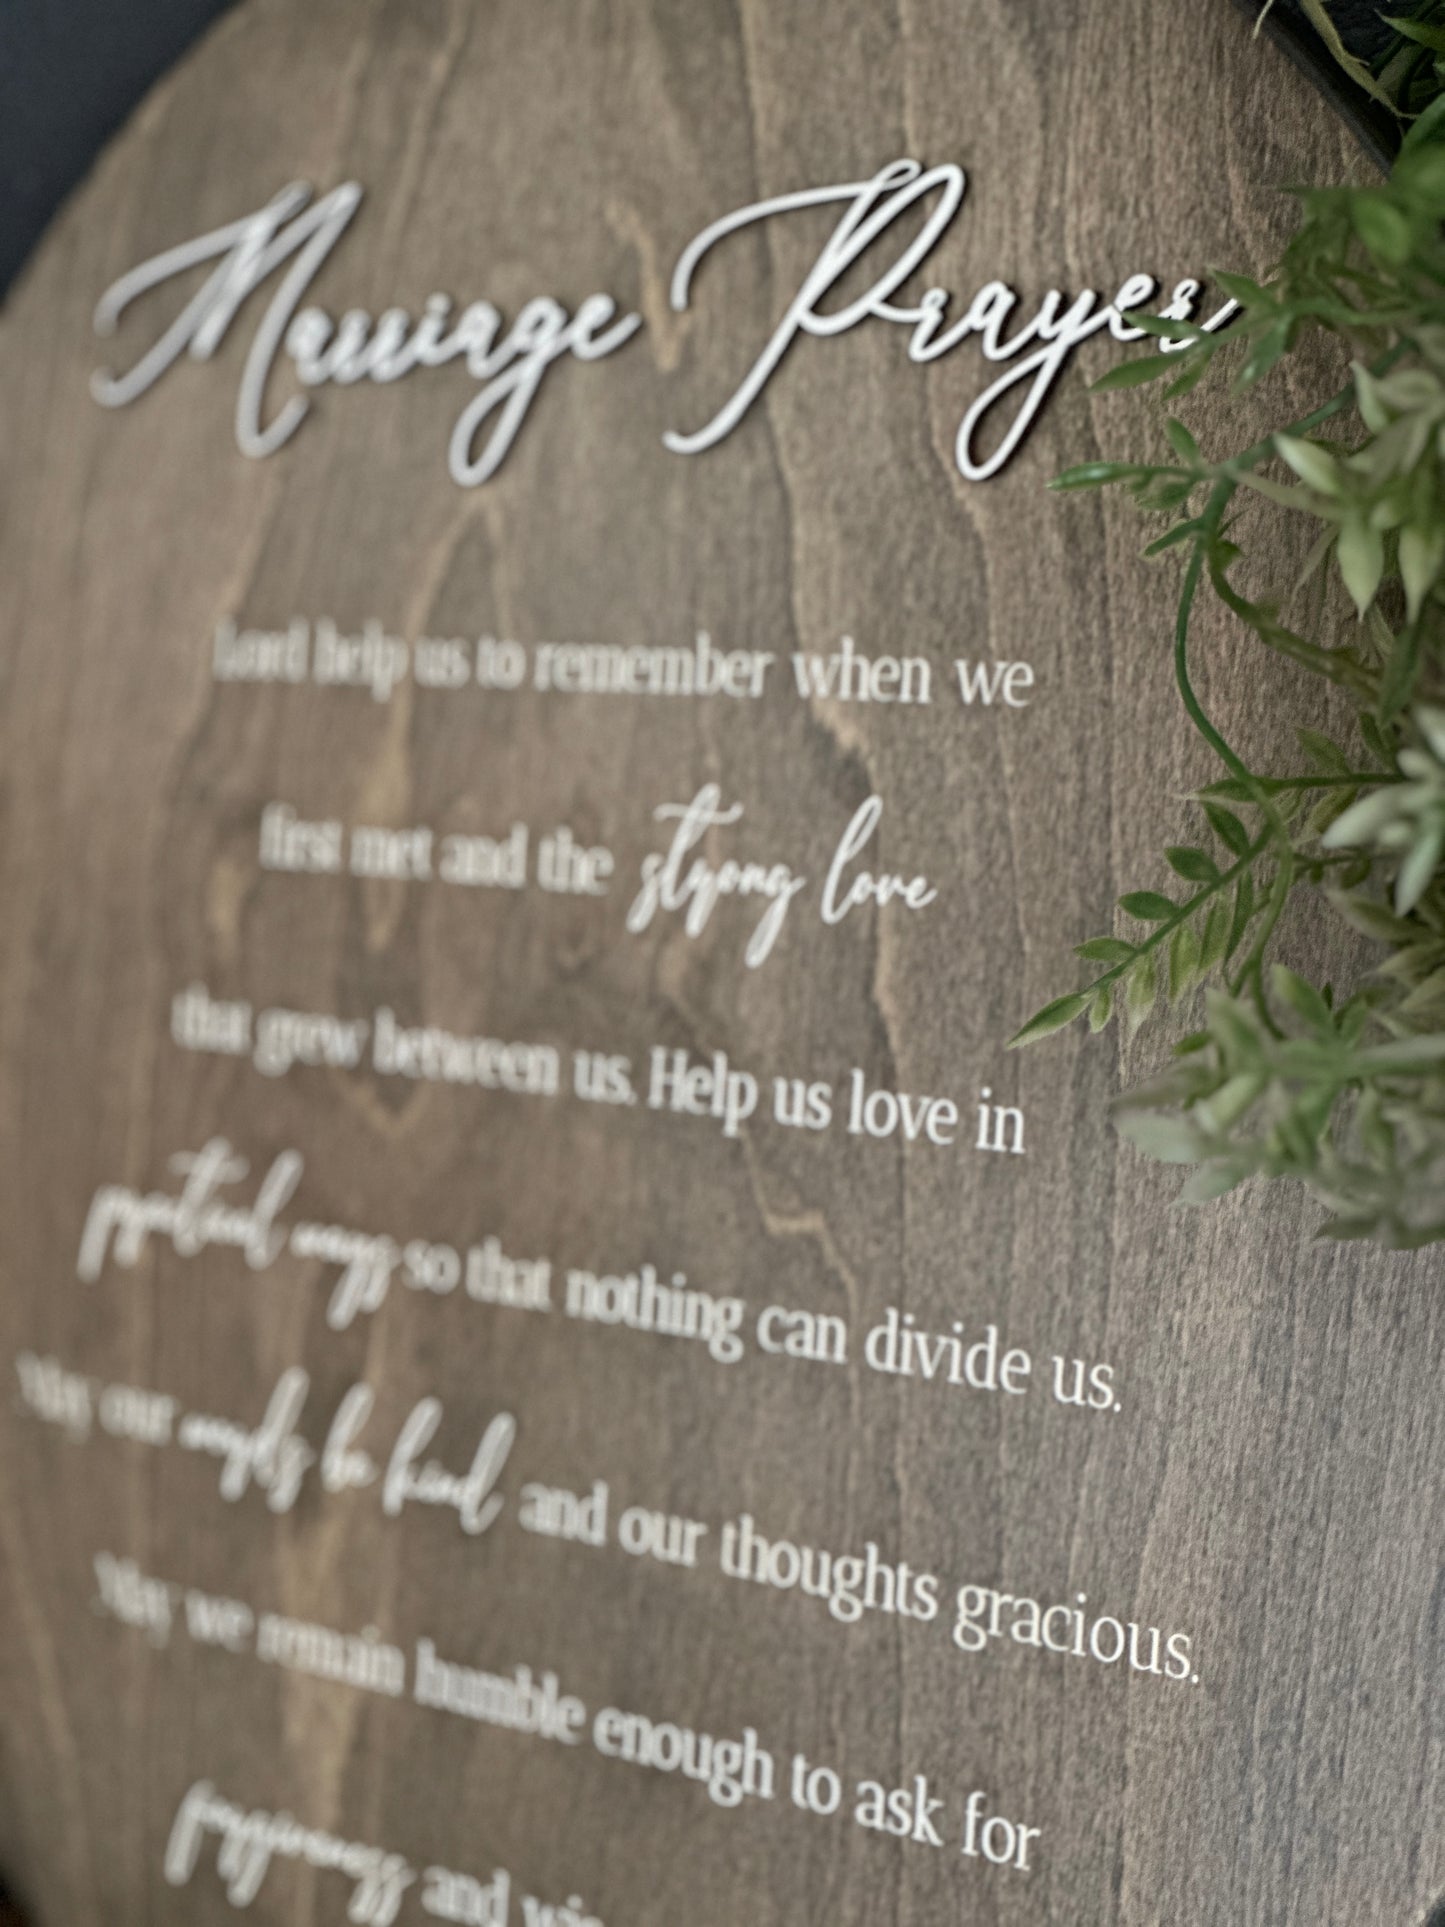 Marriage Prayer Wood Round Sign in Aged Barrel